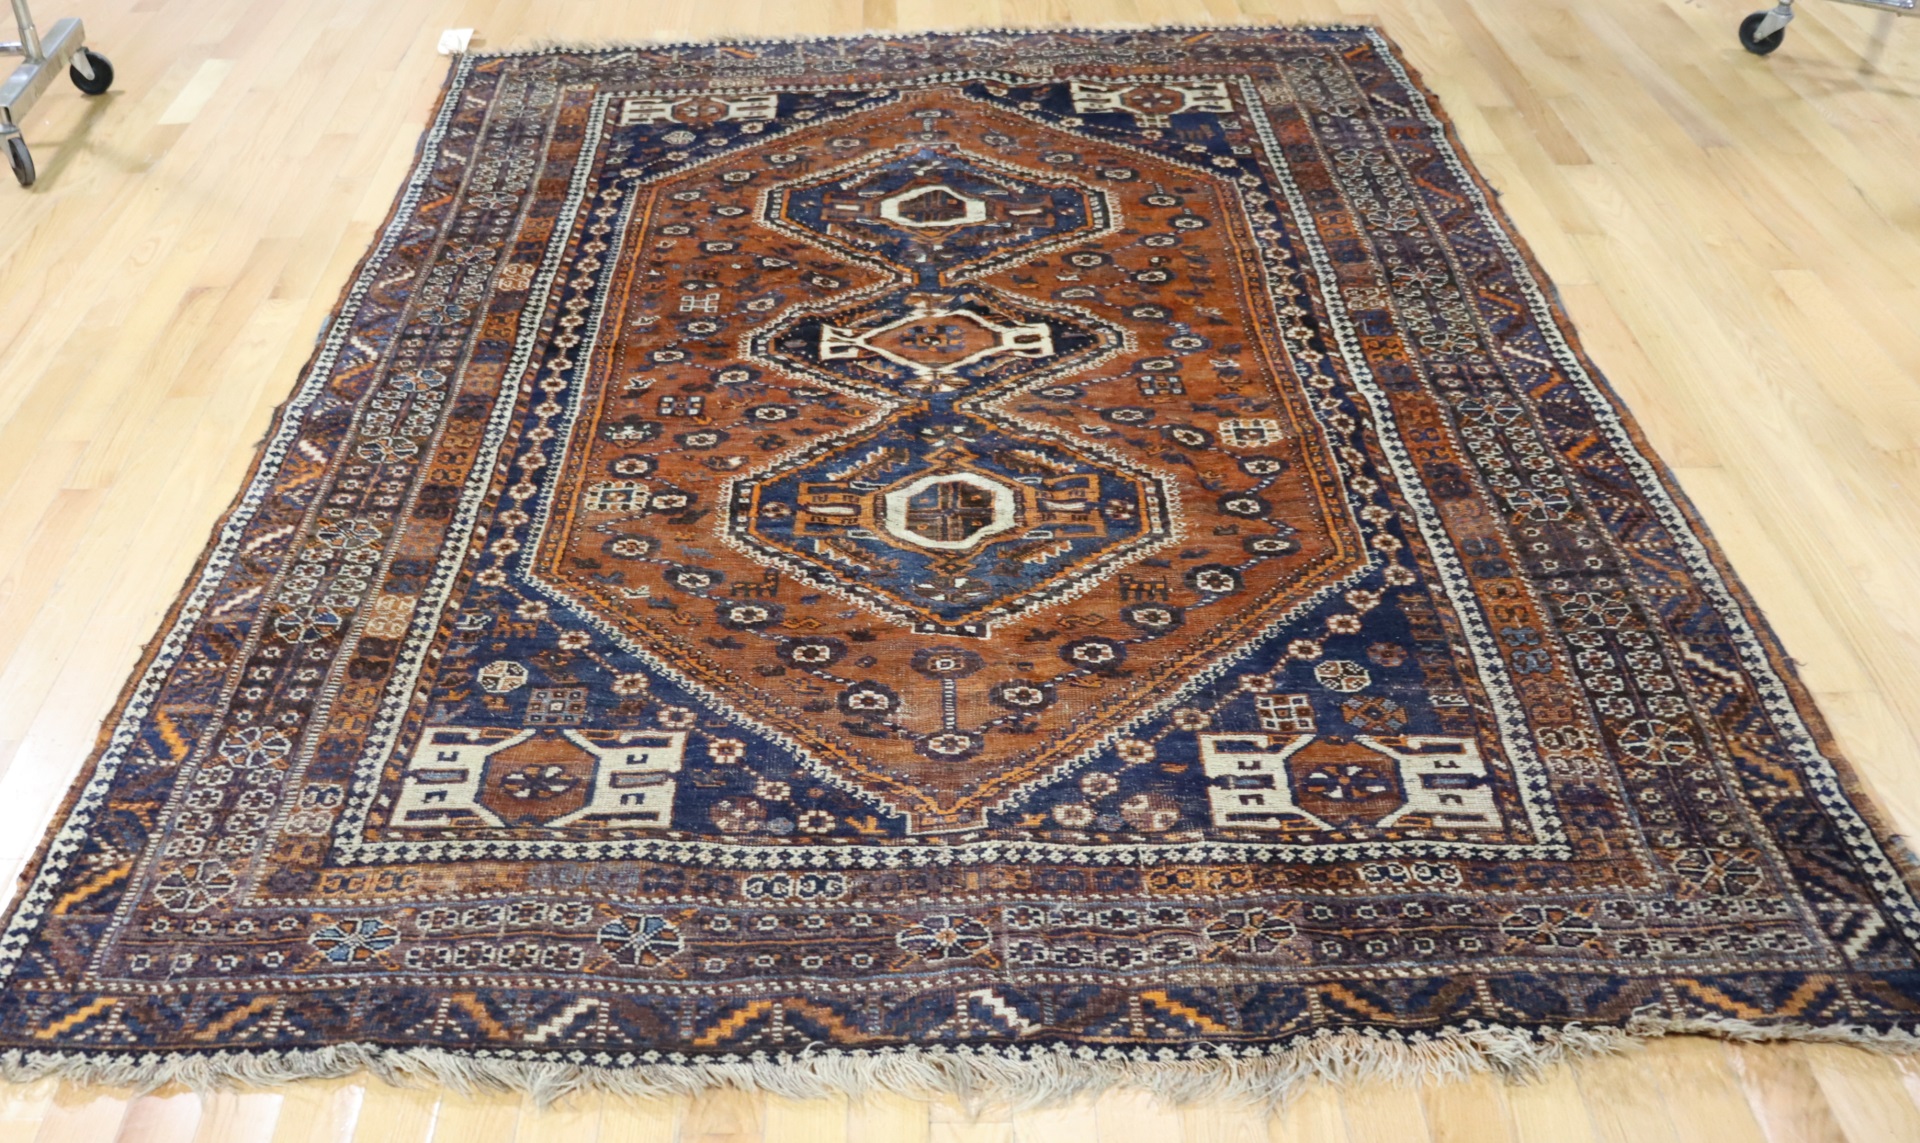 ANTIQUE AND FINELY HAND WOVEN KAZAK 3bdebd